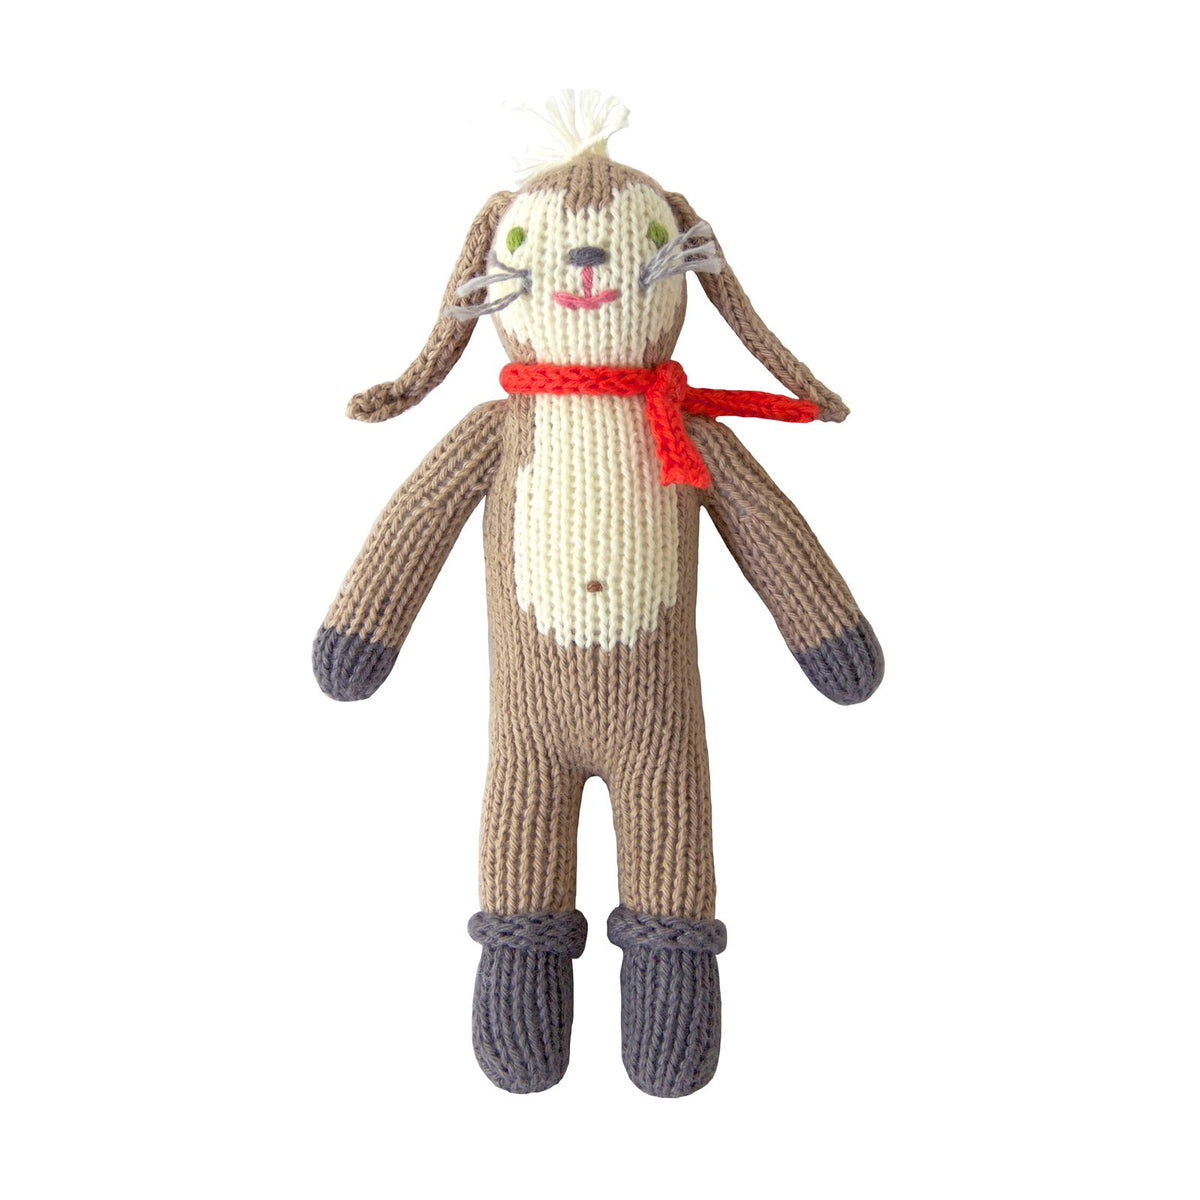 Blabla Knit Doll, Pierre the Bunny - Rattle - oh baby!